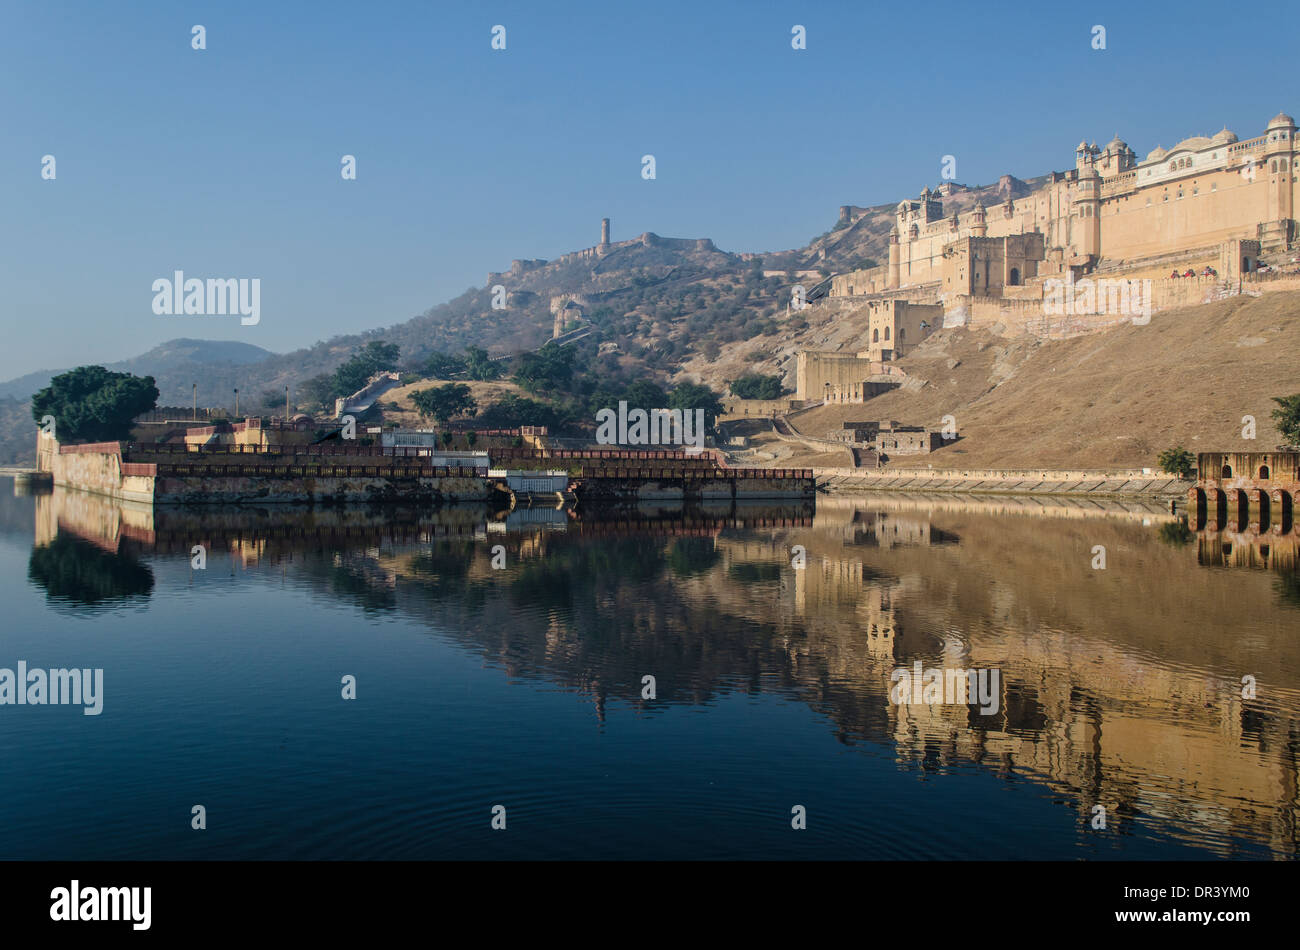 Amber Fort, a Jaipur, India Foto Stock